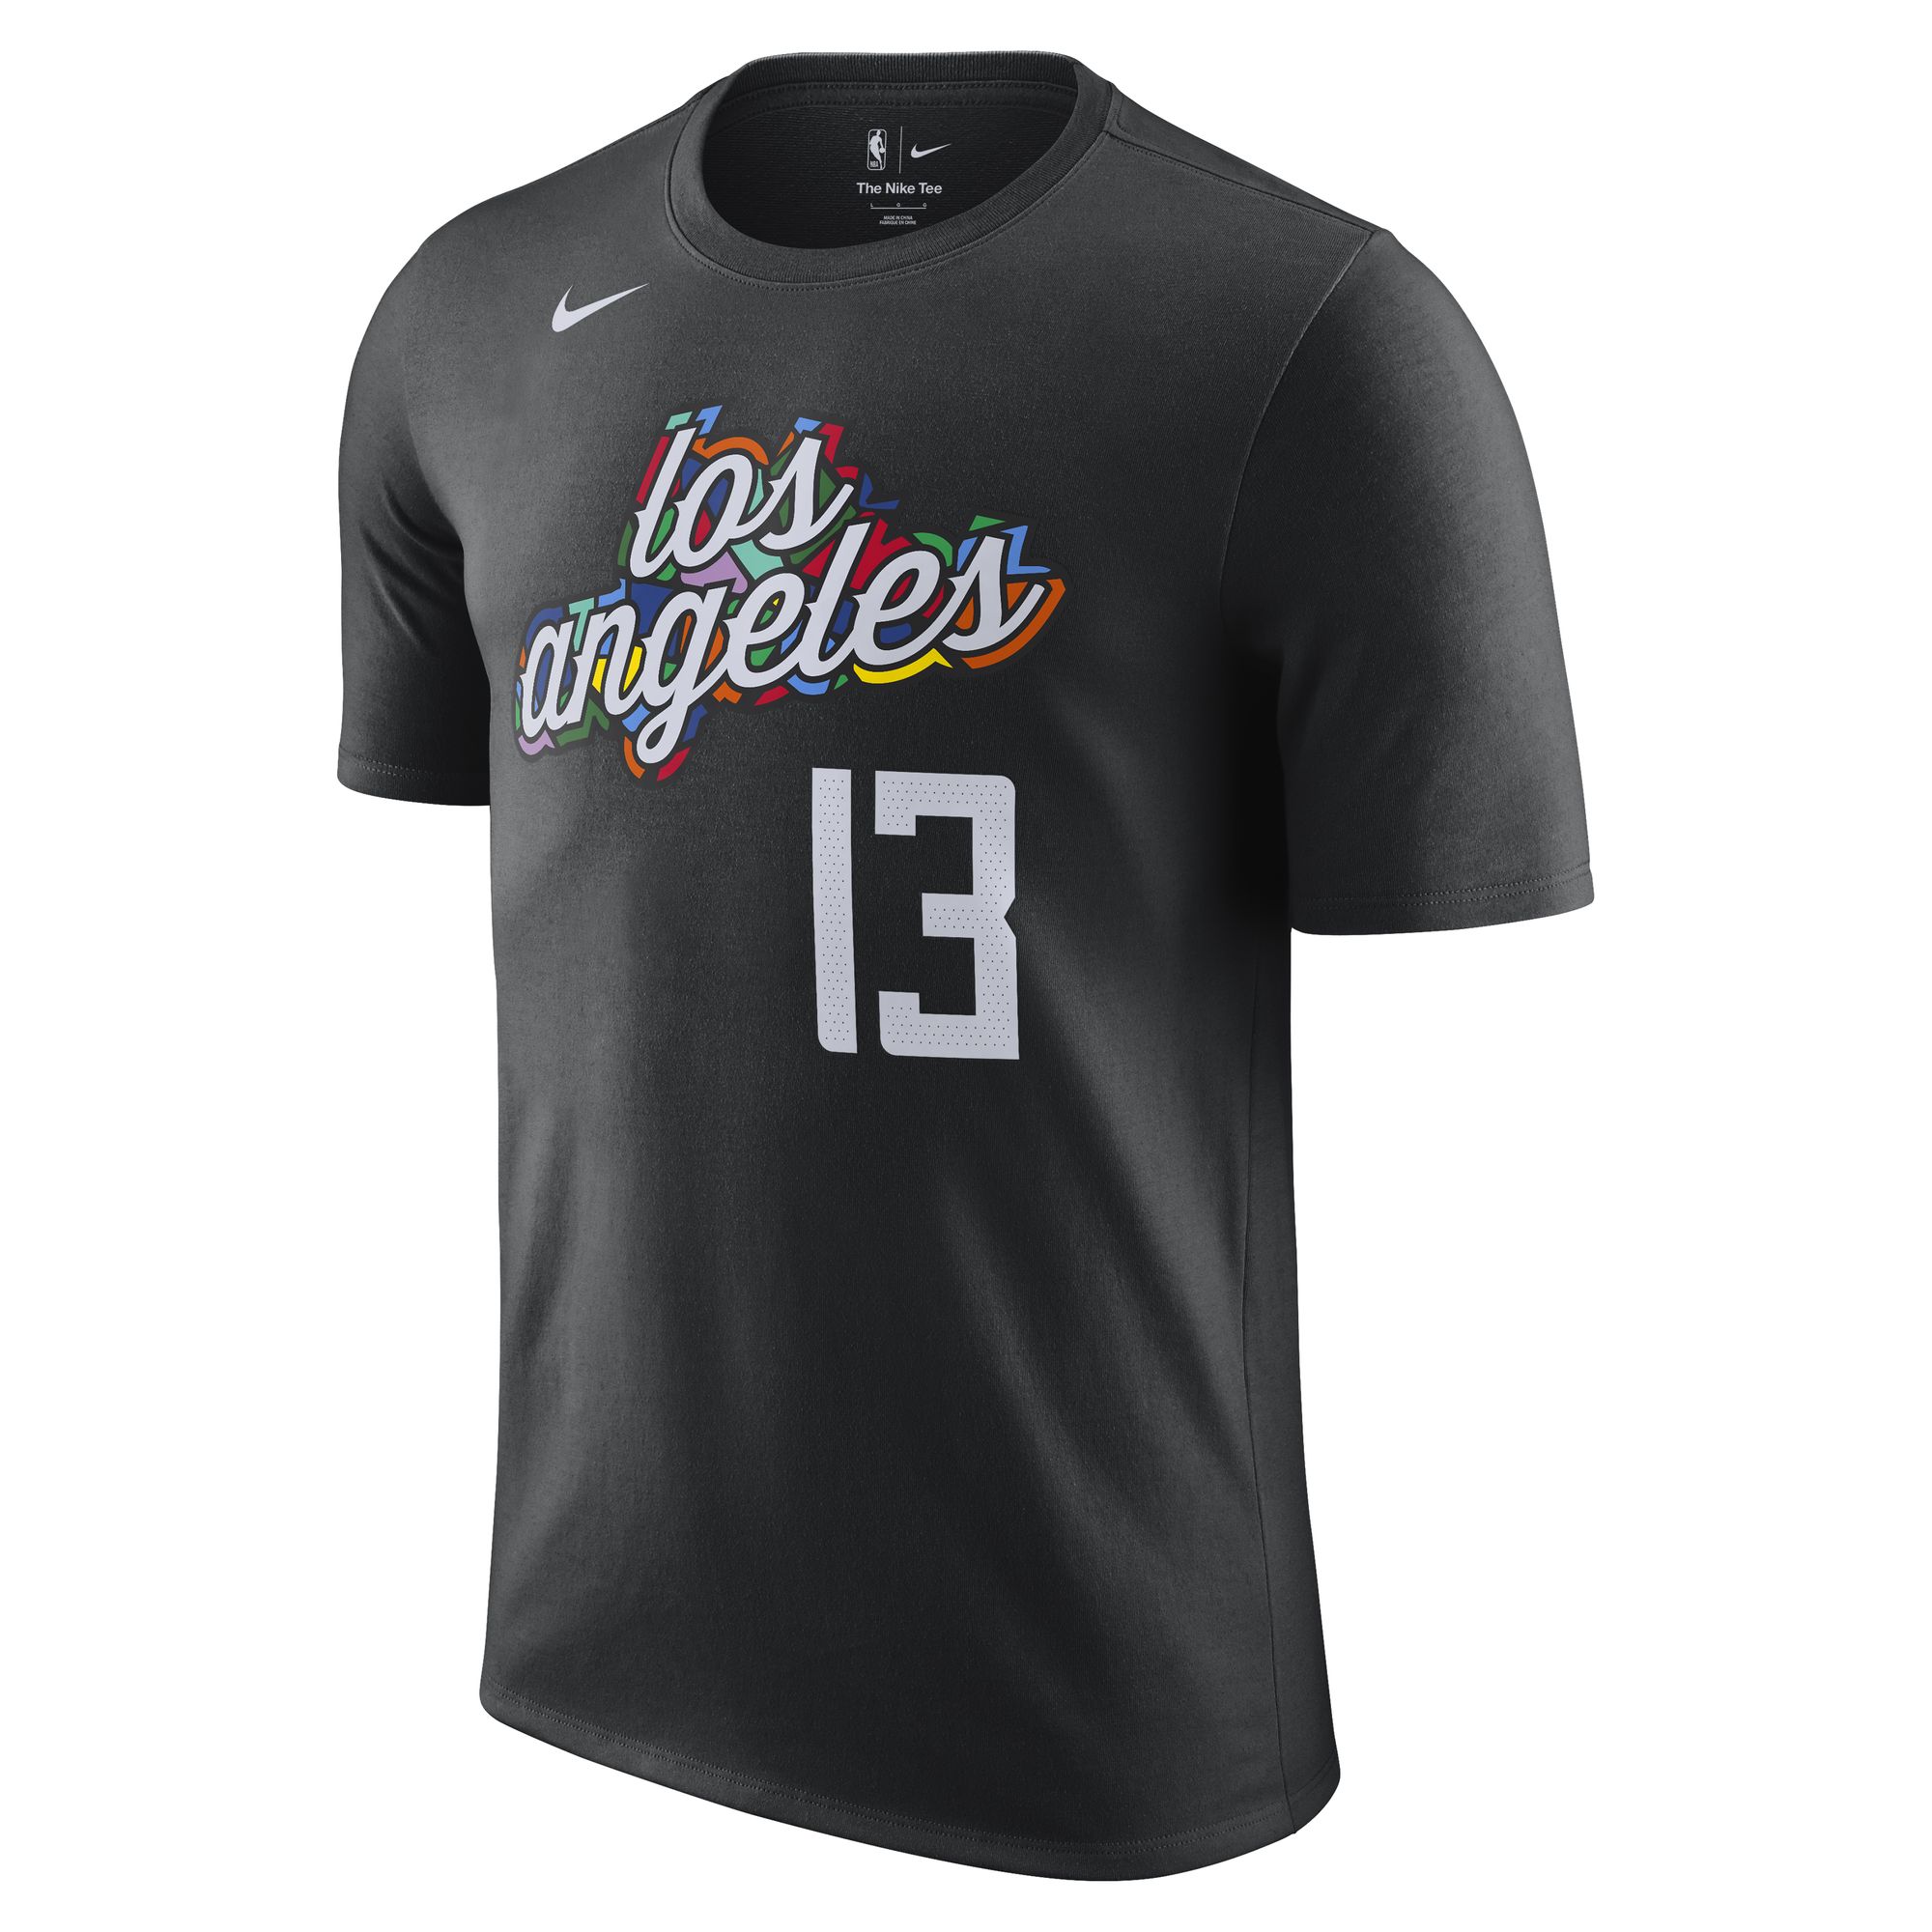 Promo NIKE Men Basketball Paul George LA Clippers City Edition Tee T ...